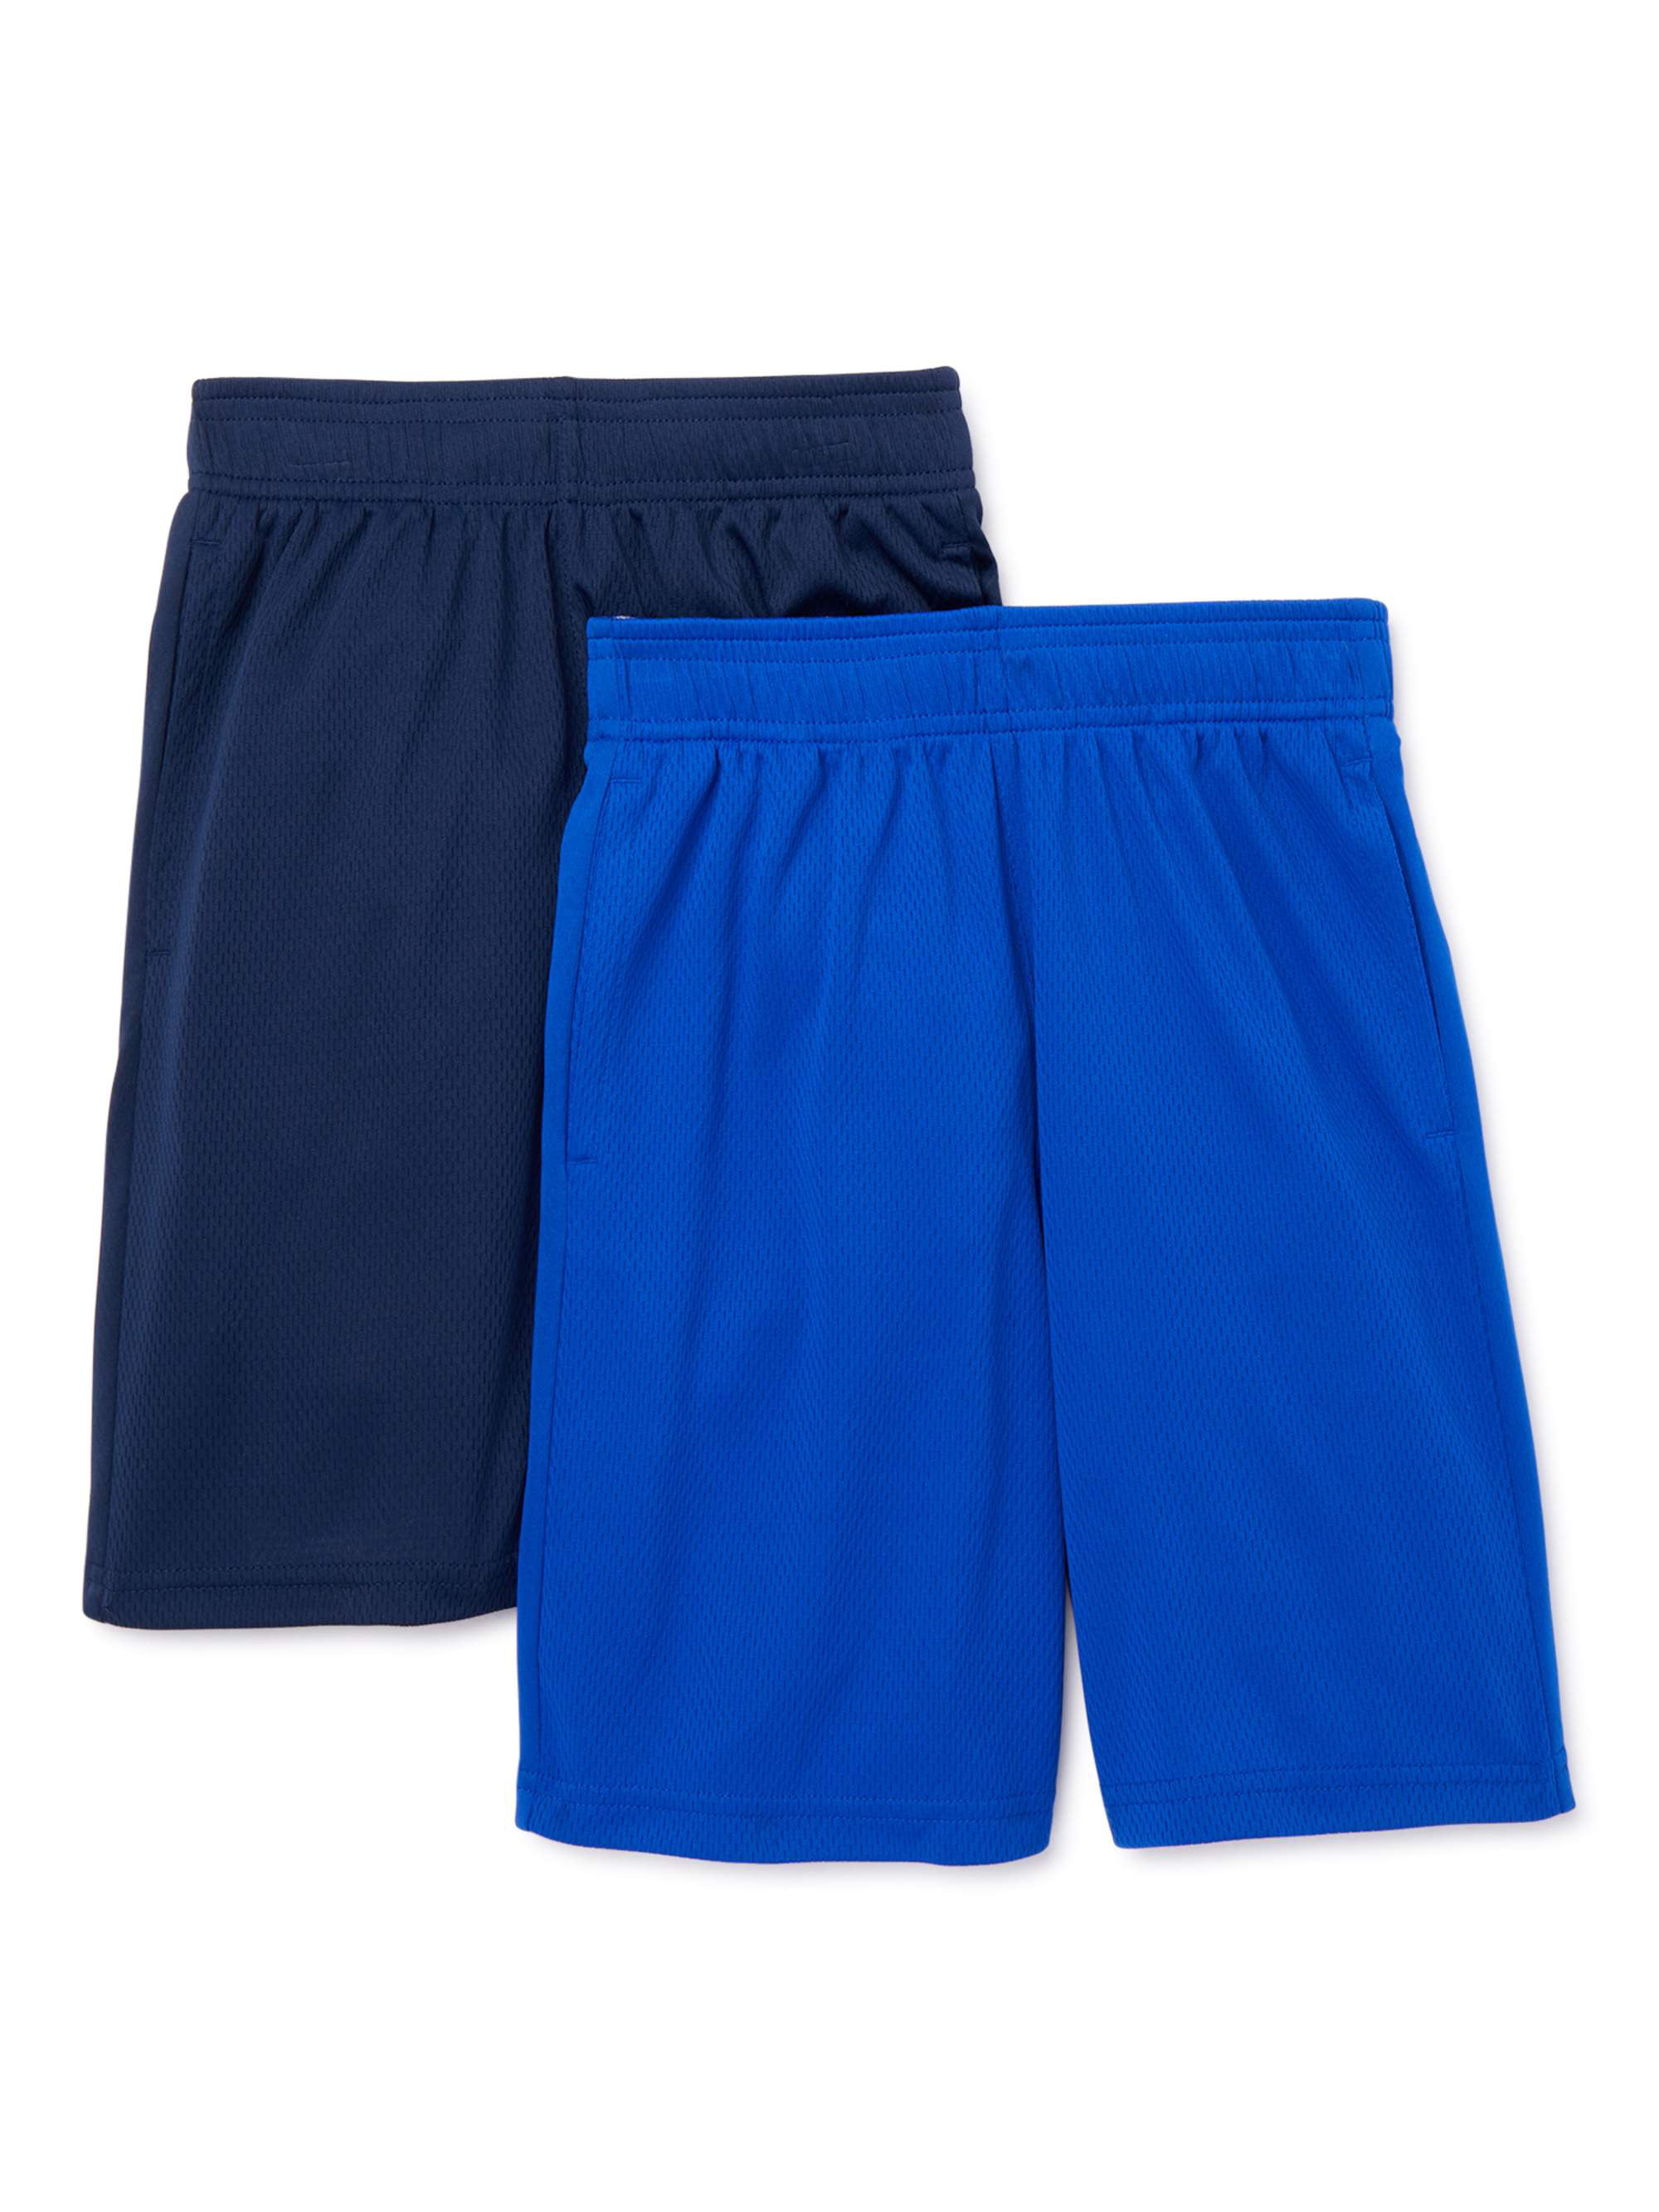 Athletic Works Boys Core DriWorks 2-Pack Shorts, Sizes 4-18